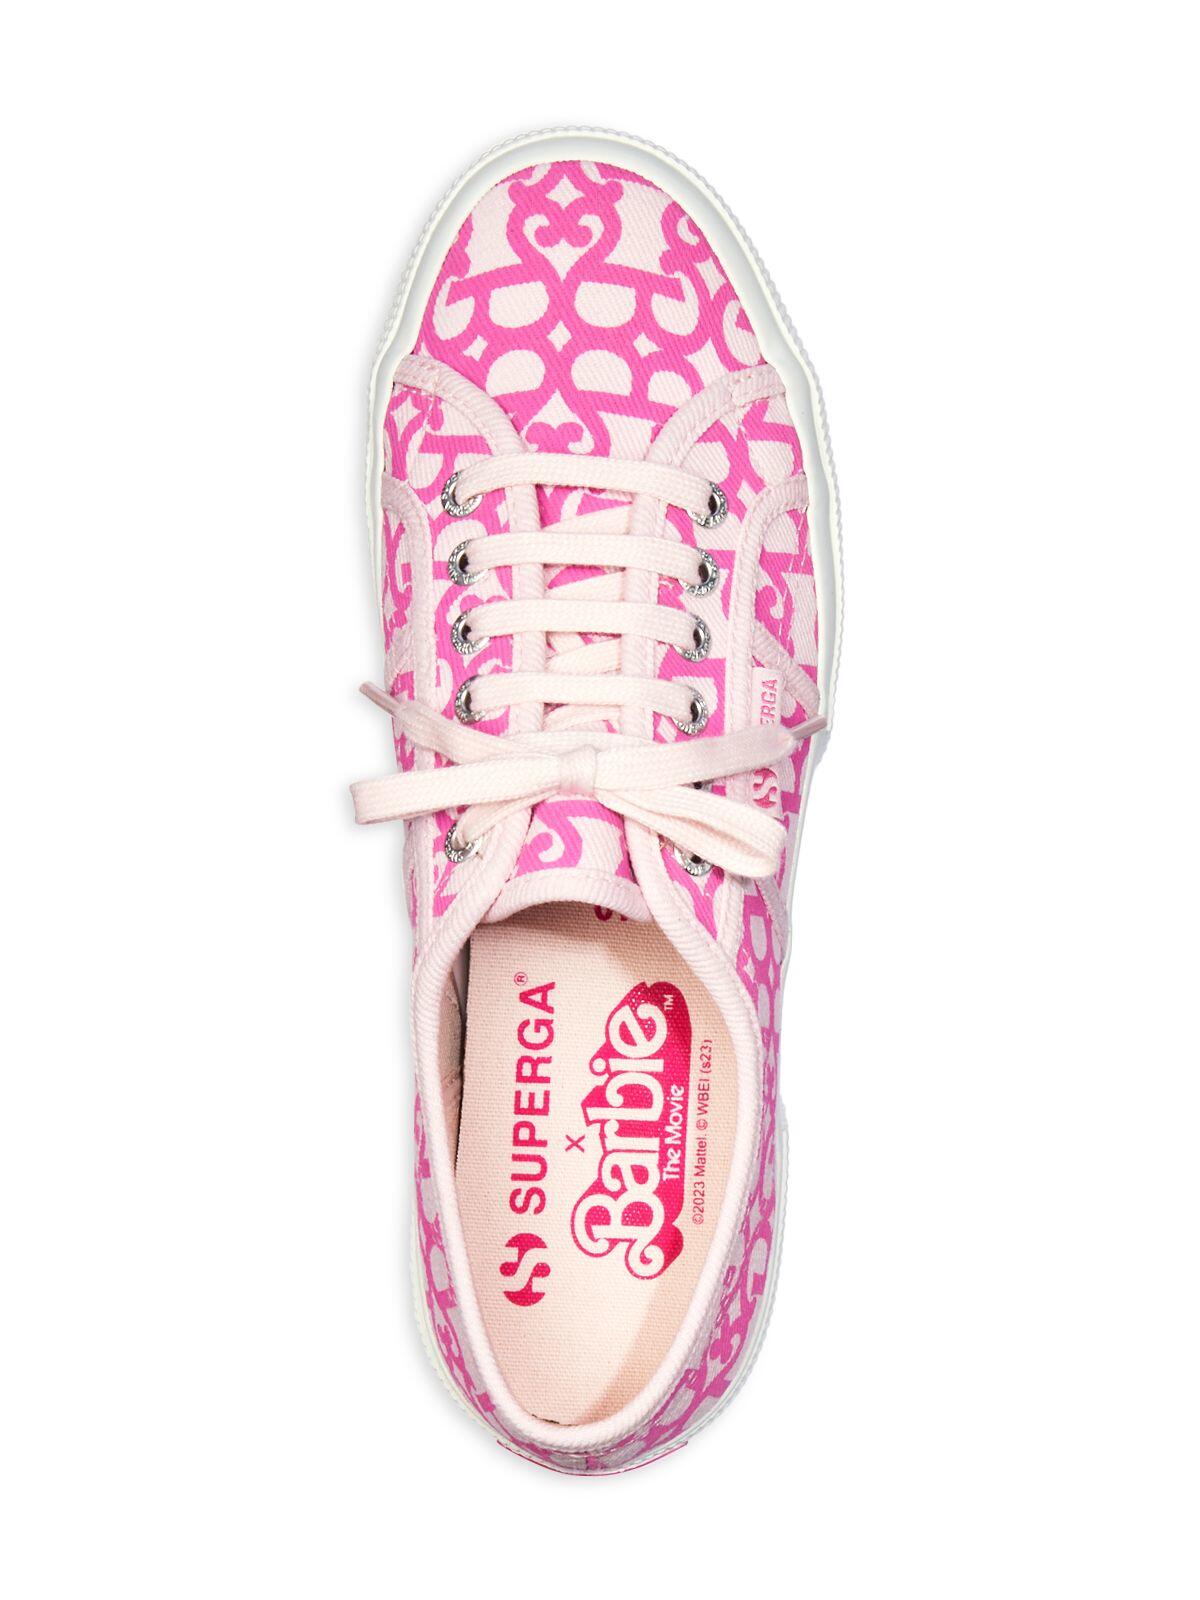 SUPERGA Womens Pink Printed Round Toe Platform Lace-Up Sneakers Shoes 8